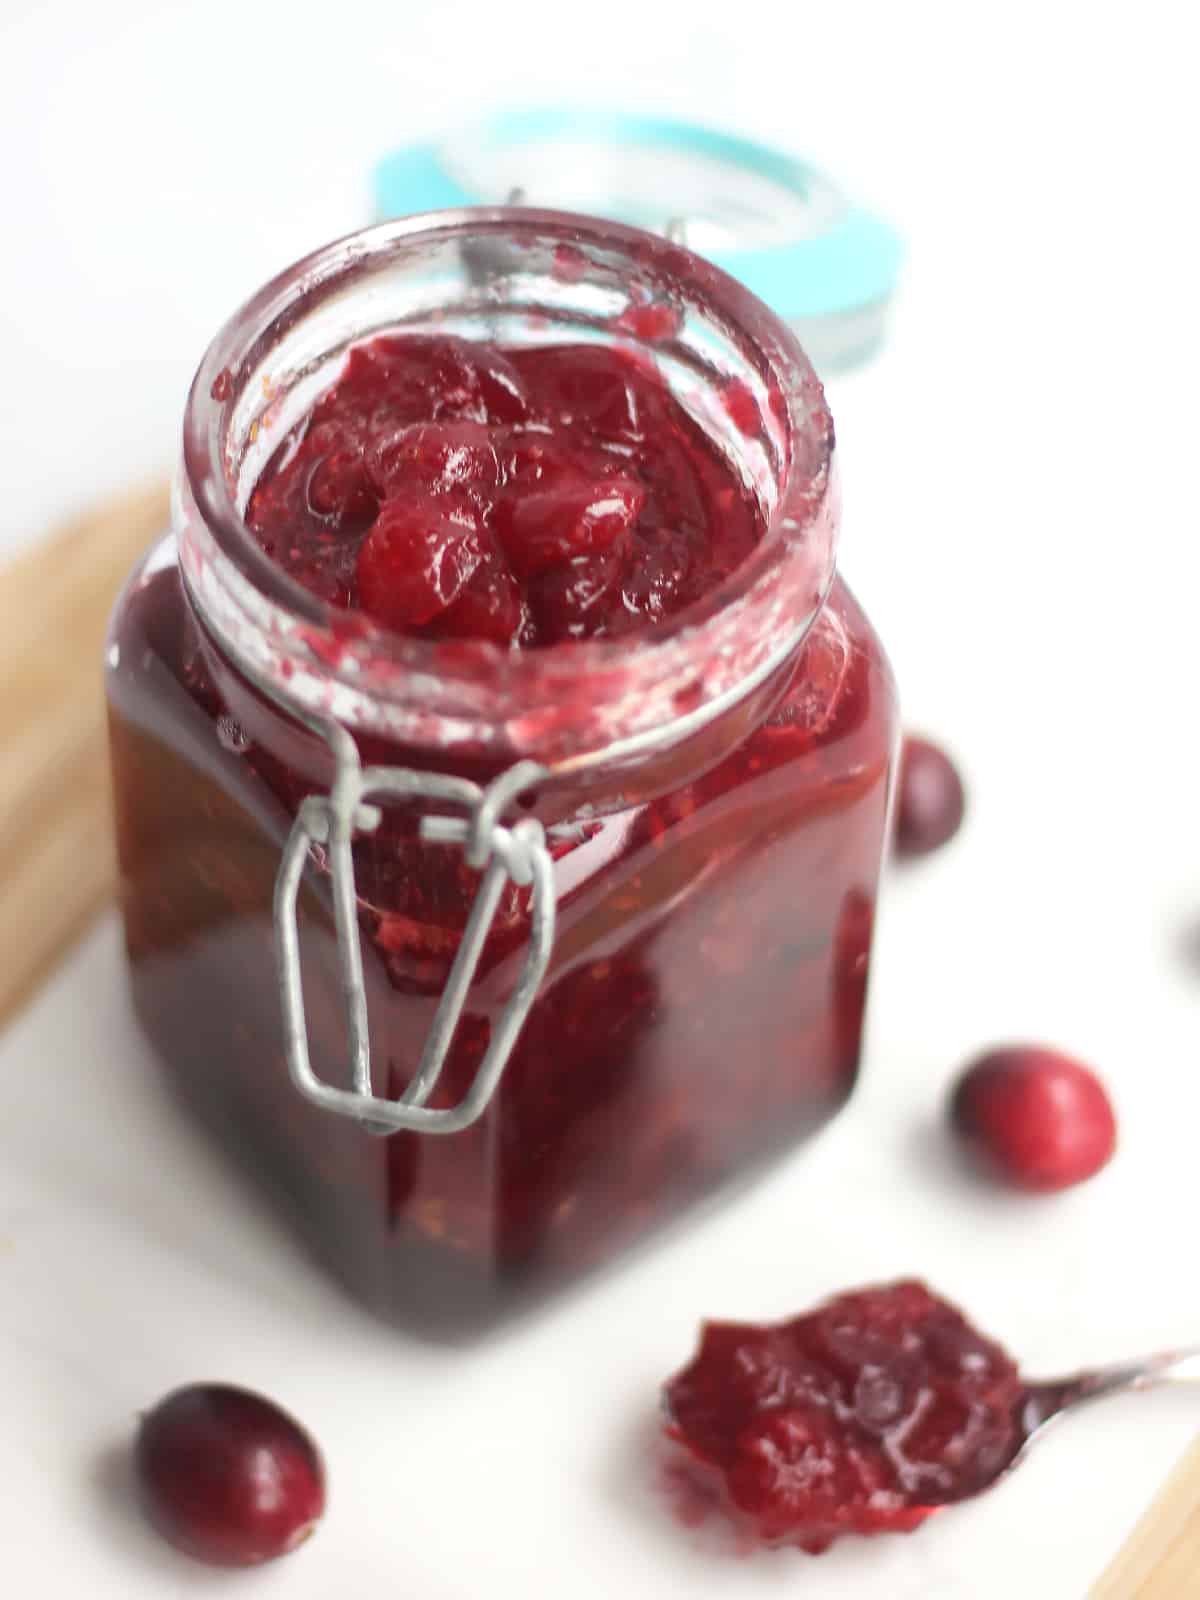 A jar of cranberry sauce next to a spoon.